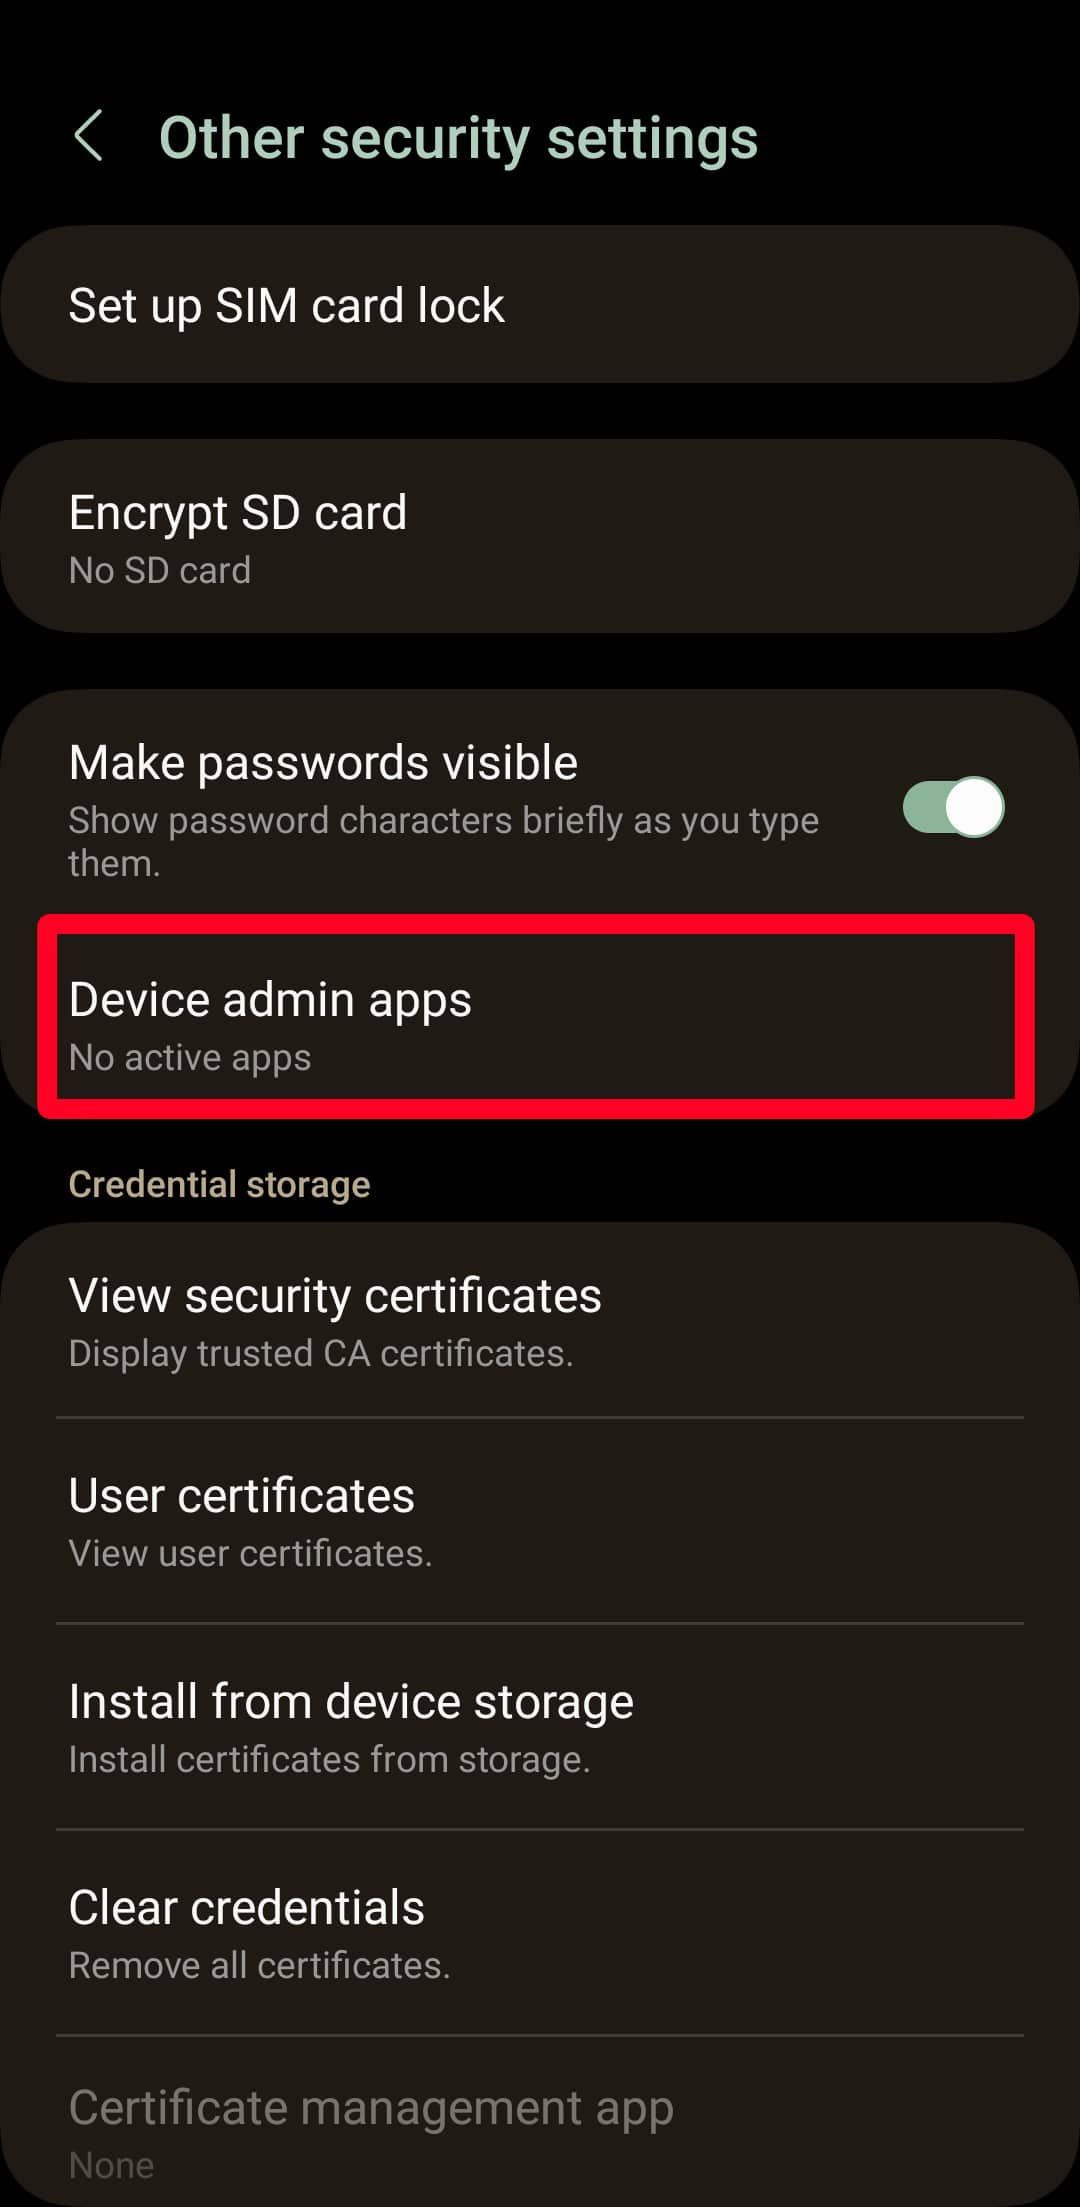 Other security settings menu on Android phone